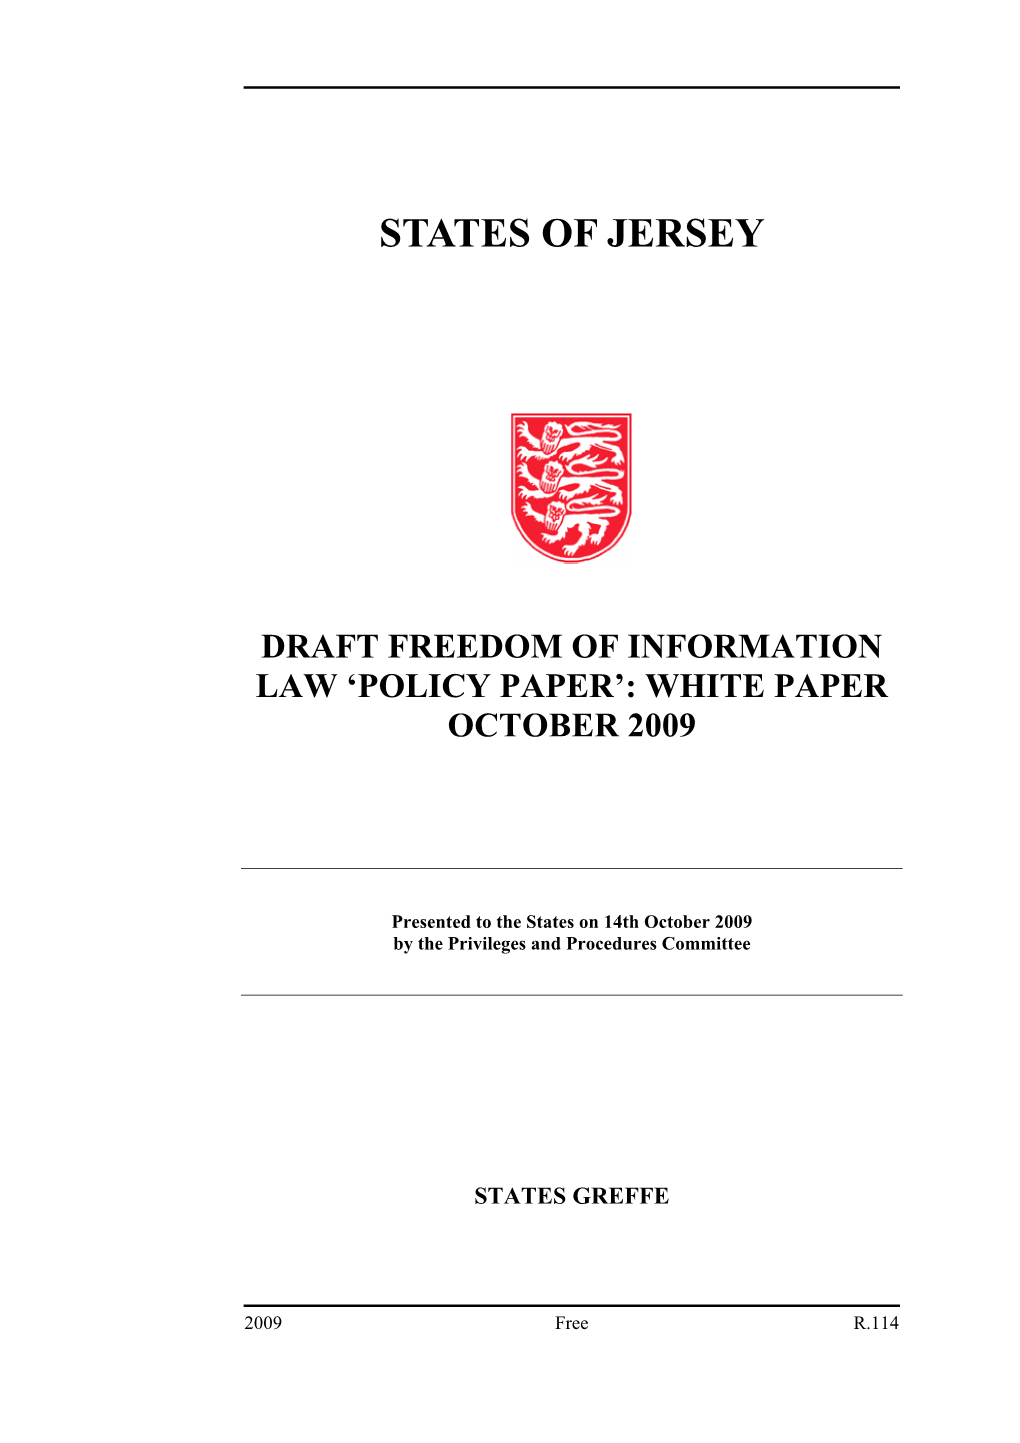 Draft Freedom of Information Law ‘Policy Paper’: White Paper October 2009